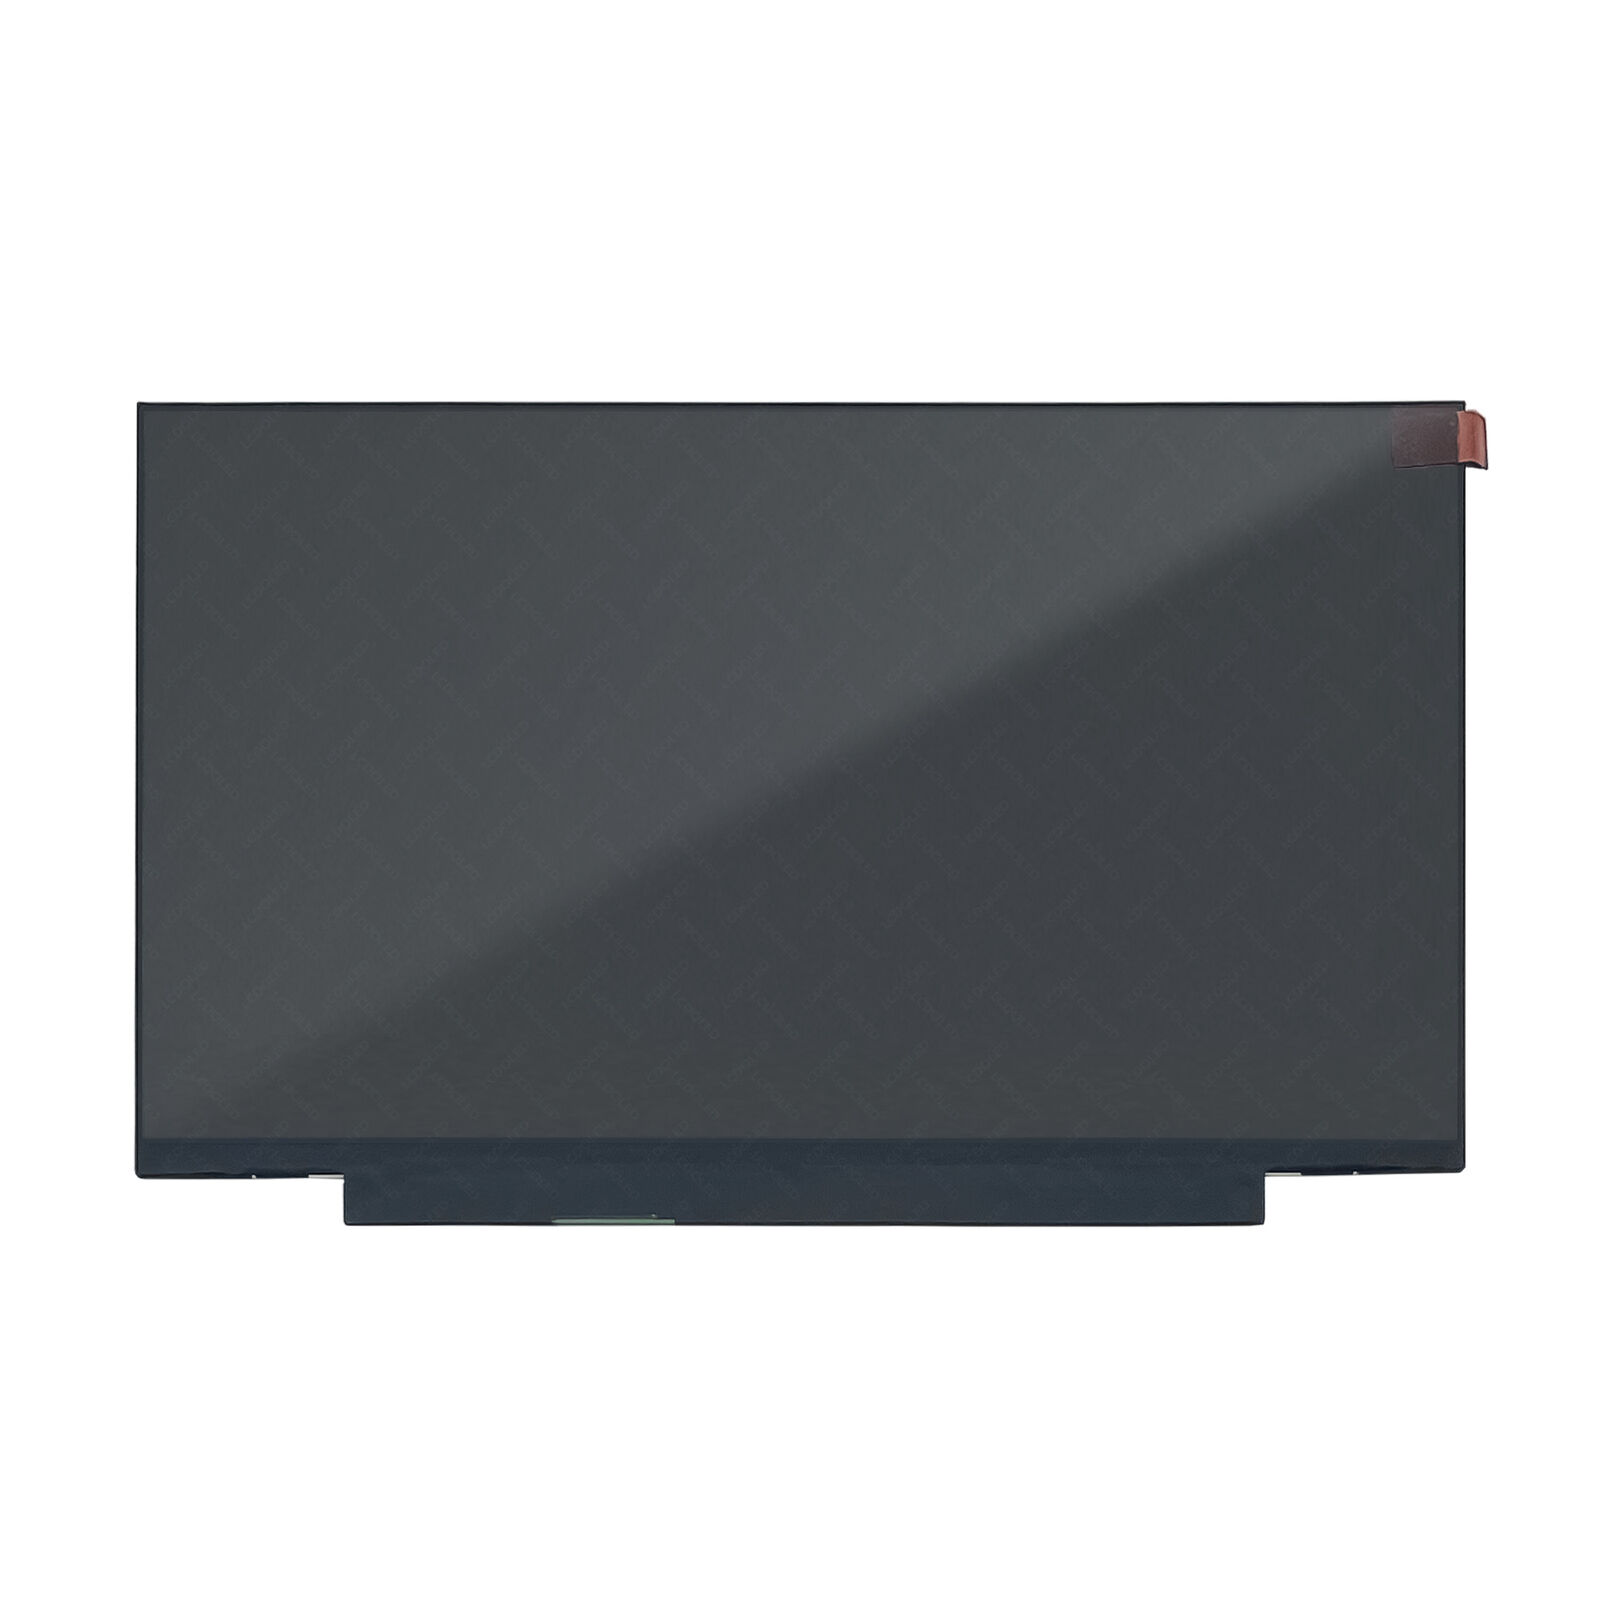 14'' 100% sRGB FHD IPS 144Hz LED LCD Screen Display for Dell Alienware X14 R1